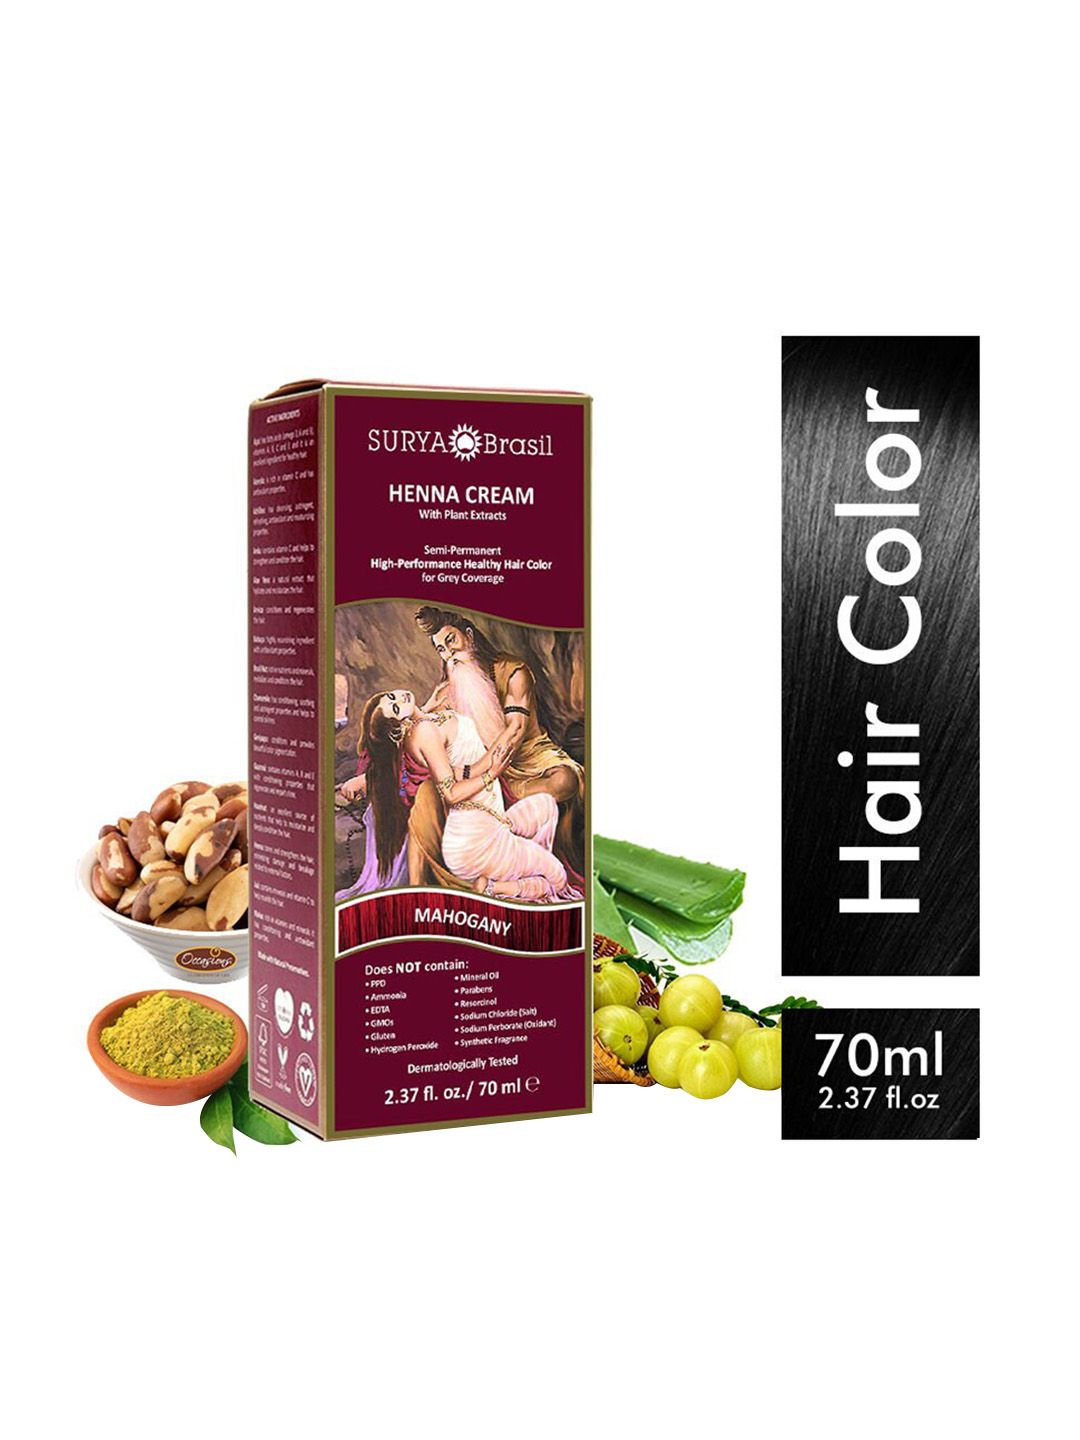 SURYA Brasil Henna Cream Semi-Permanent Hair Color with Plant Extracts 70ml - Mahogany Price in India